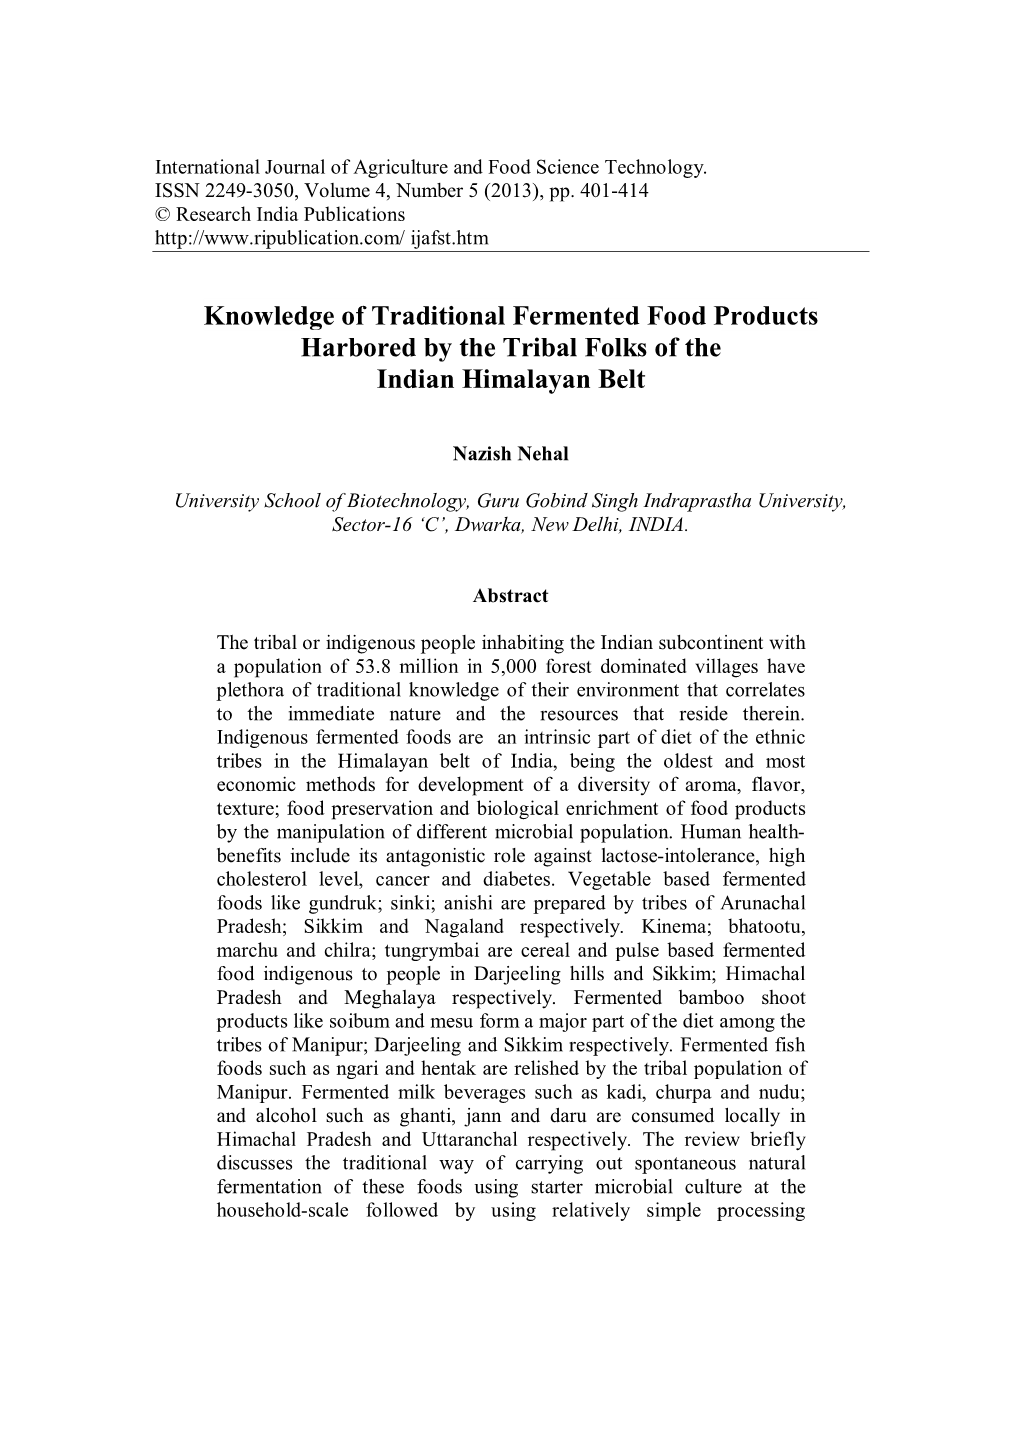 Knowledge of Traditional Fermented Food Products Harbored by the Tribal Folks of the Indian Himalayan Belt